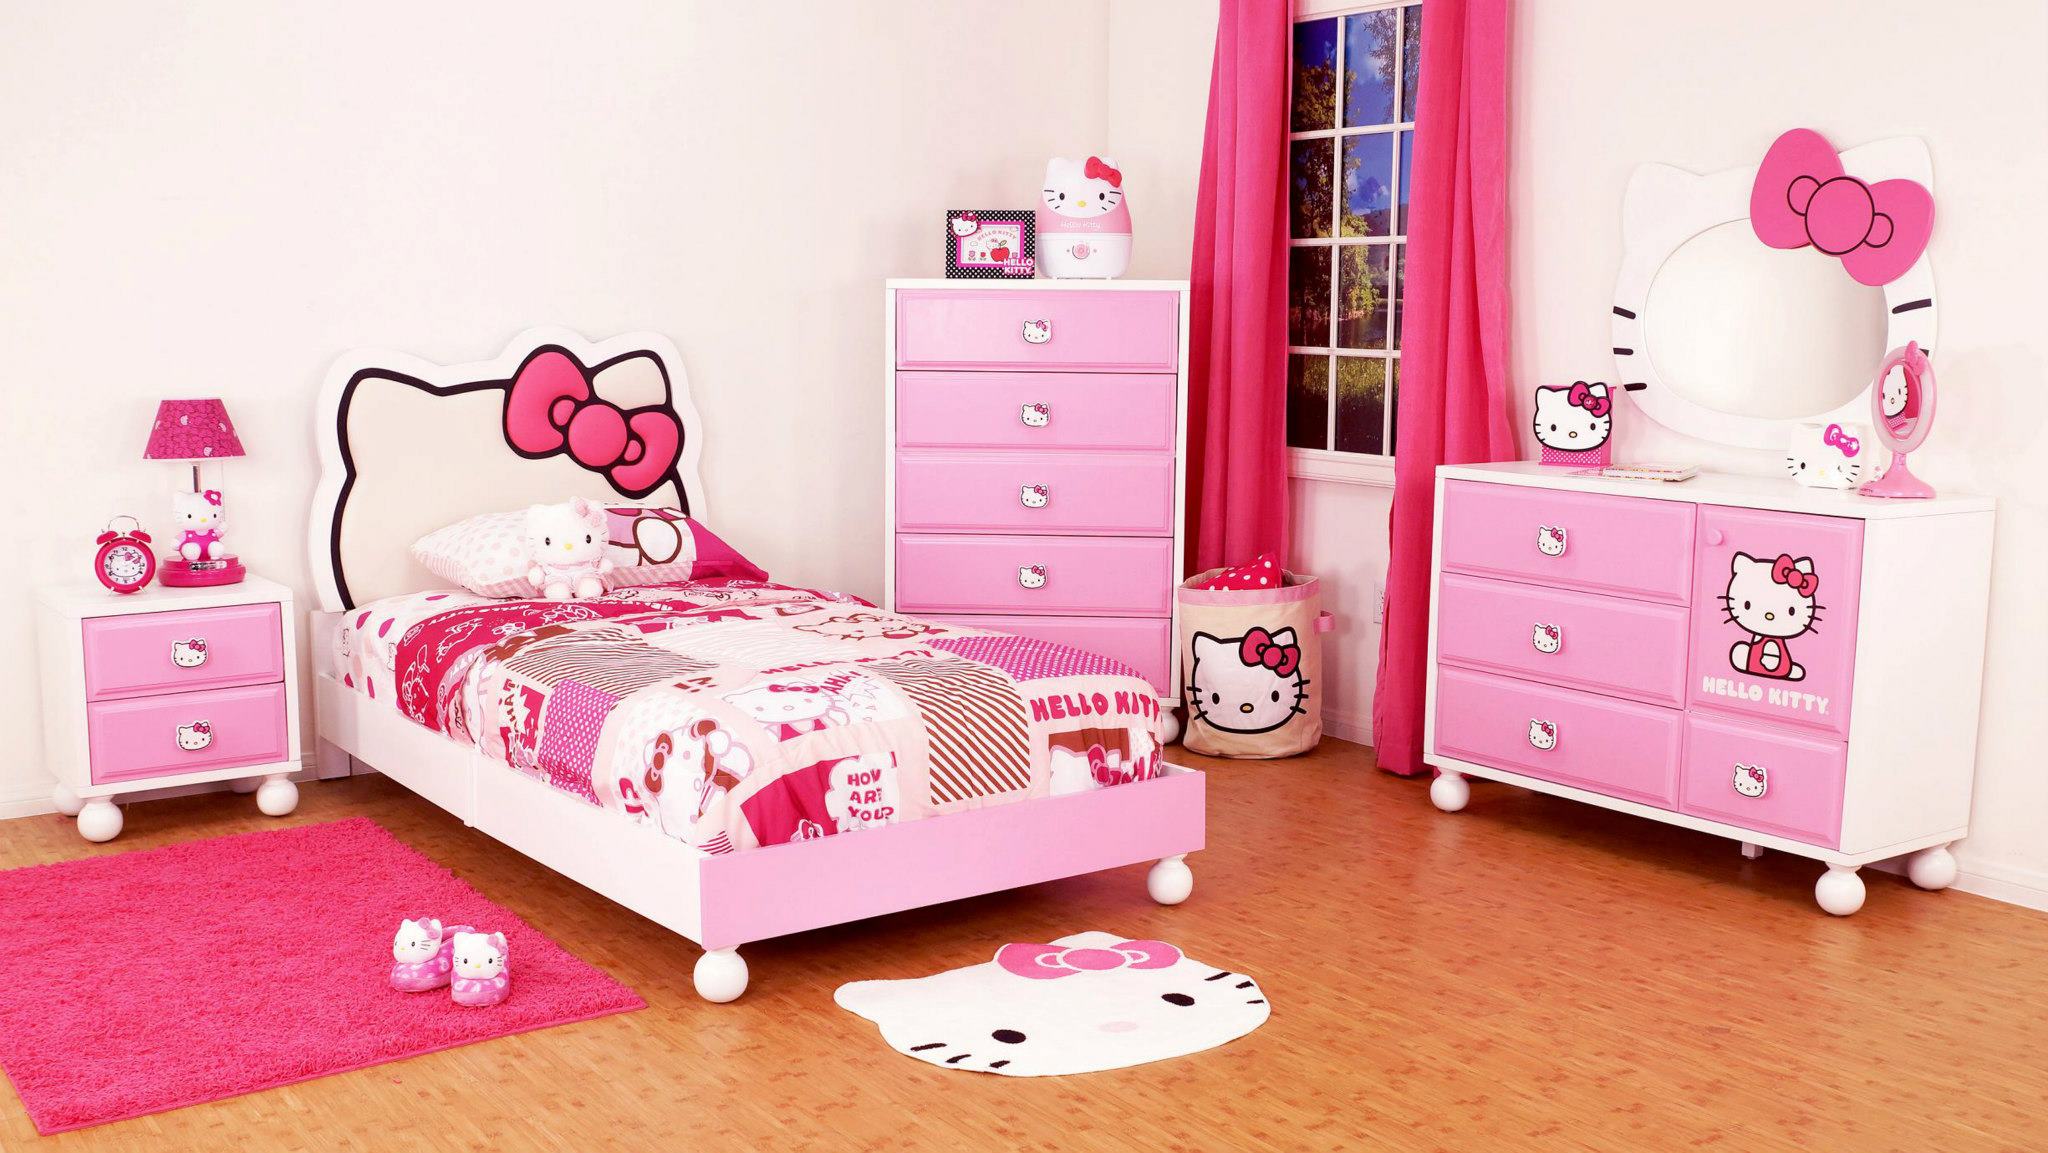 hello kitty bedroom furniture for kids photo - 5